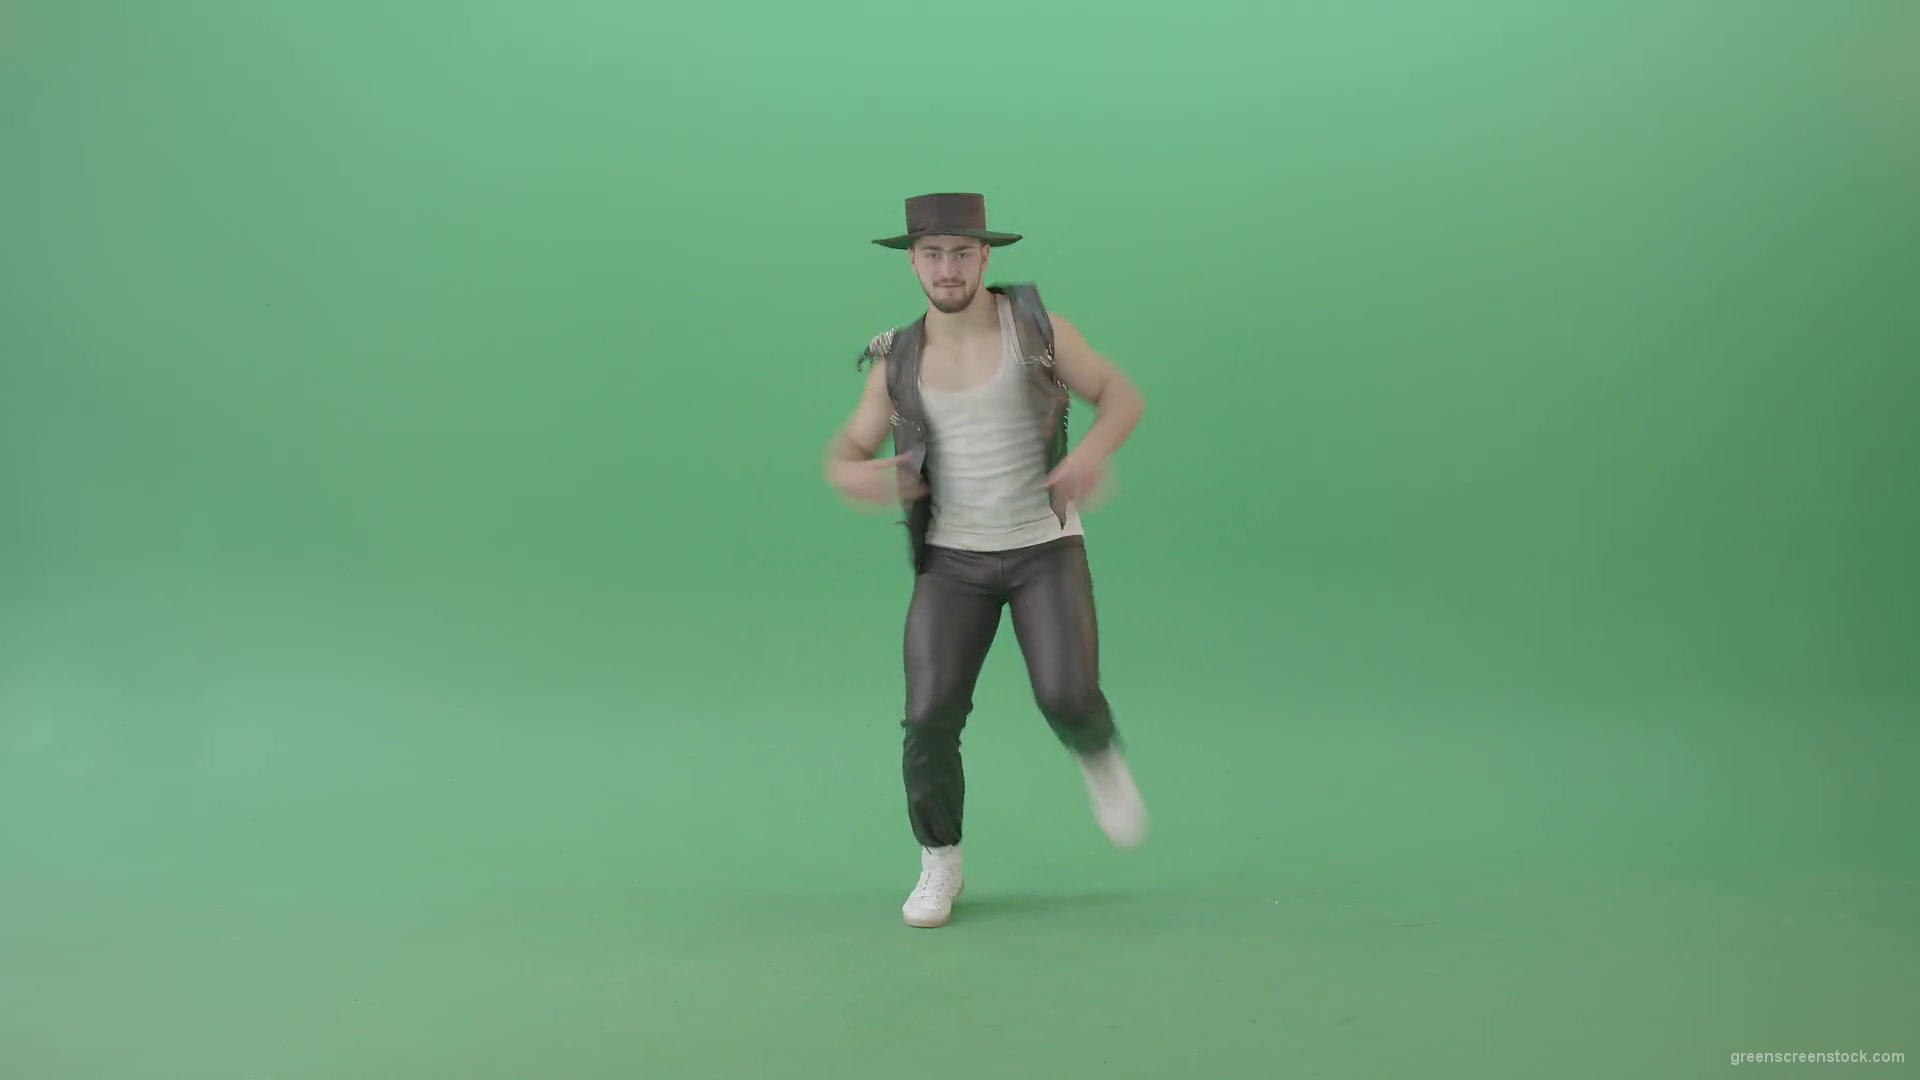 American-Man-with-beard-and-in-black-hat-dancing-Shuffle-isolated-on-Chroma-key-green-screen-4K-Video-Footage-1920_002 Green Screen Stock